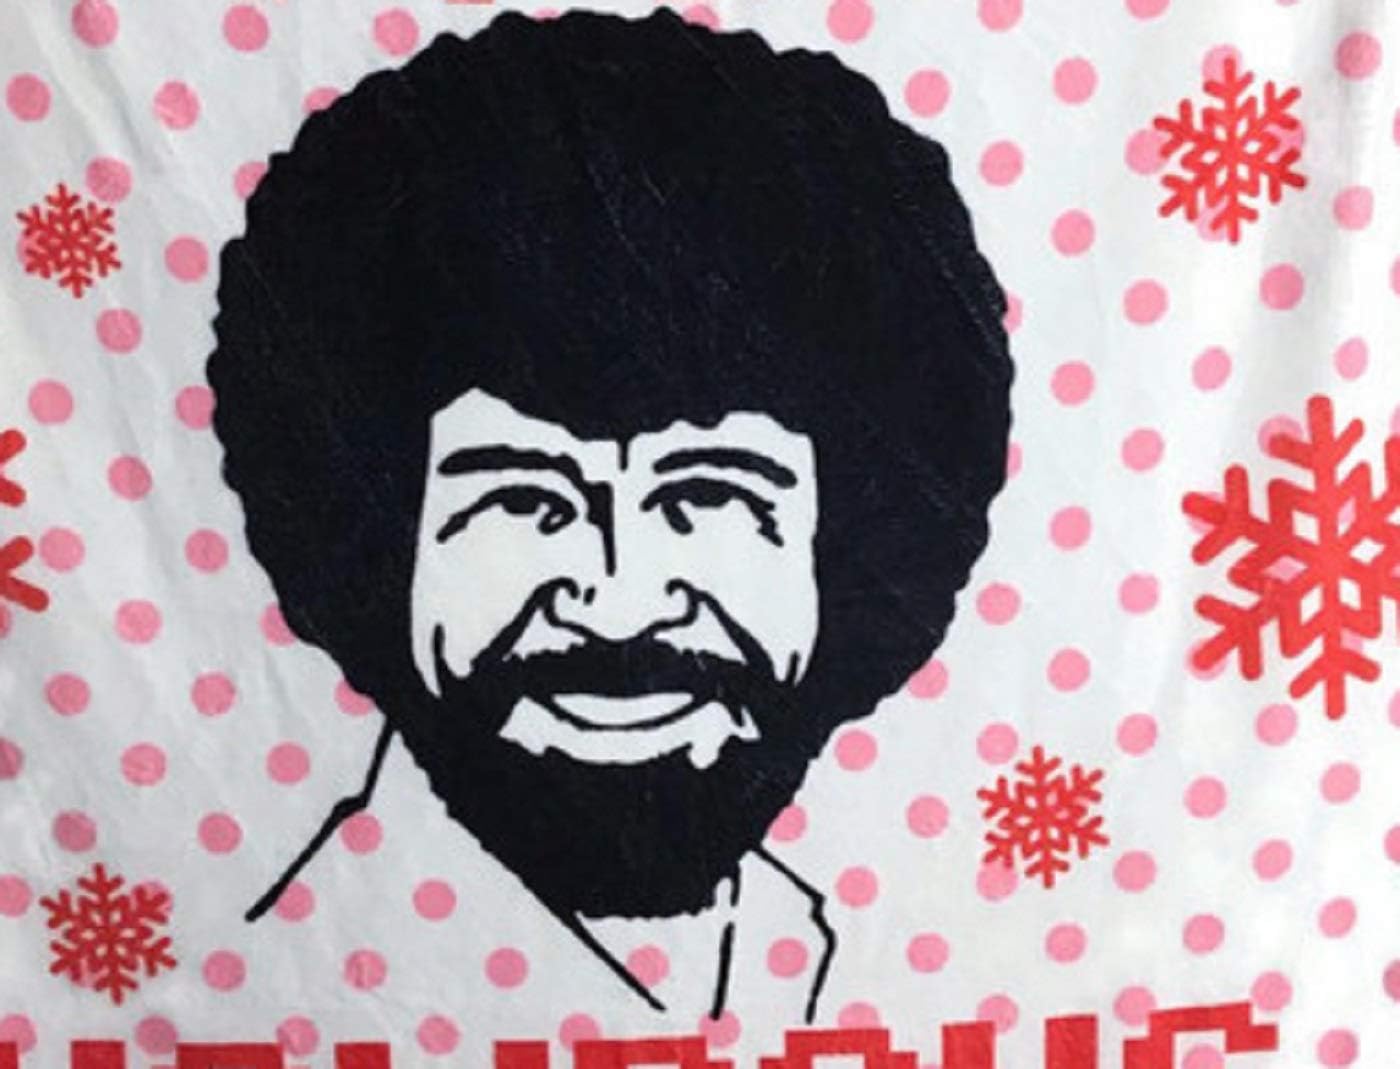 Bob Ross Happy Little Holidays Fleece Softest Comfy Throw Blanket for Adults & Kids| Measures 60 x 45 Inches